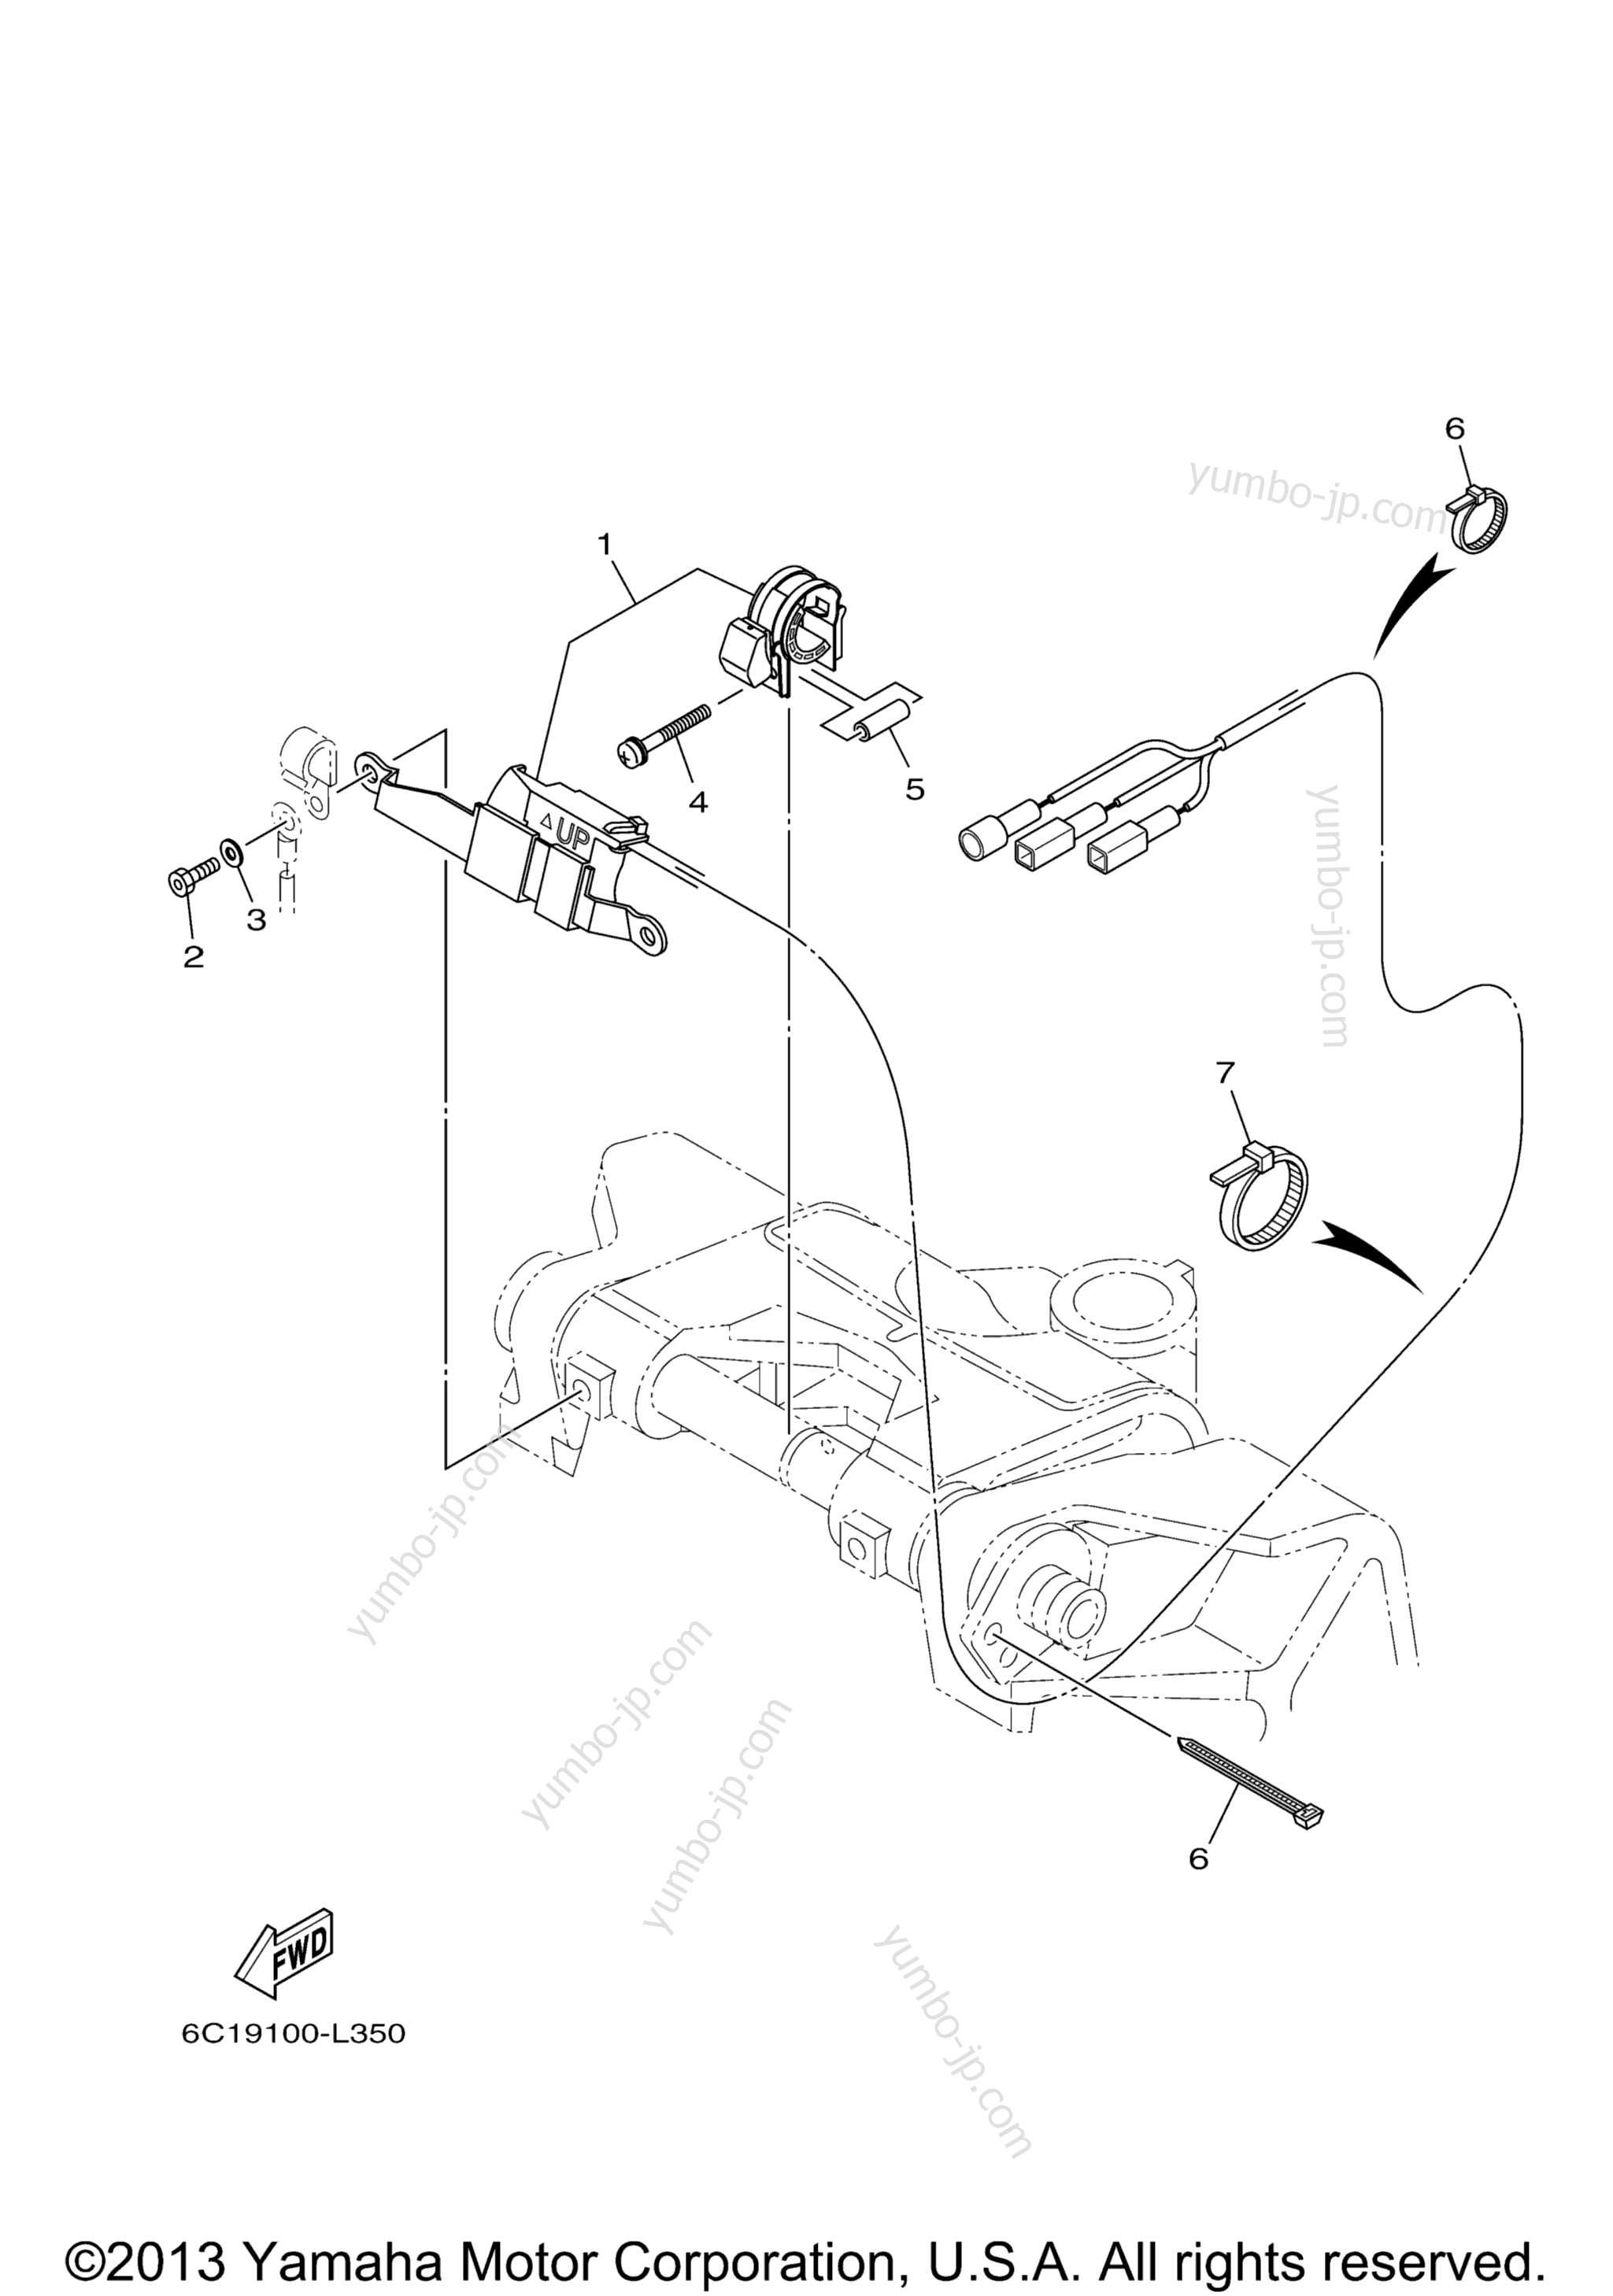 Optional Parts 2 for outboards YAMAHA F60LA_0112 (0112) 2006 year